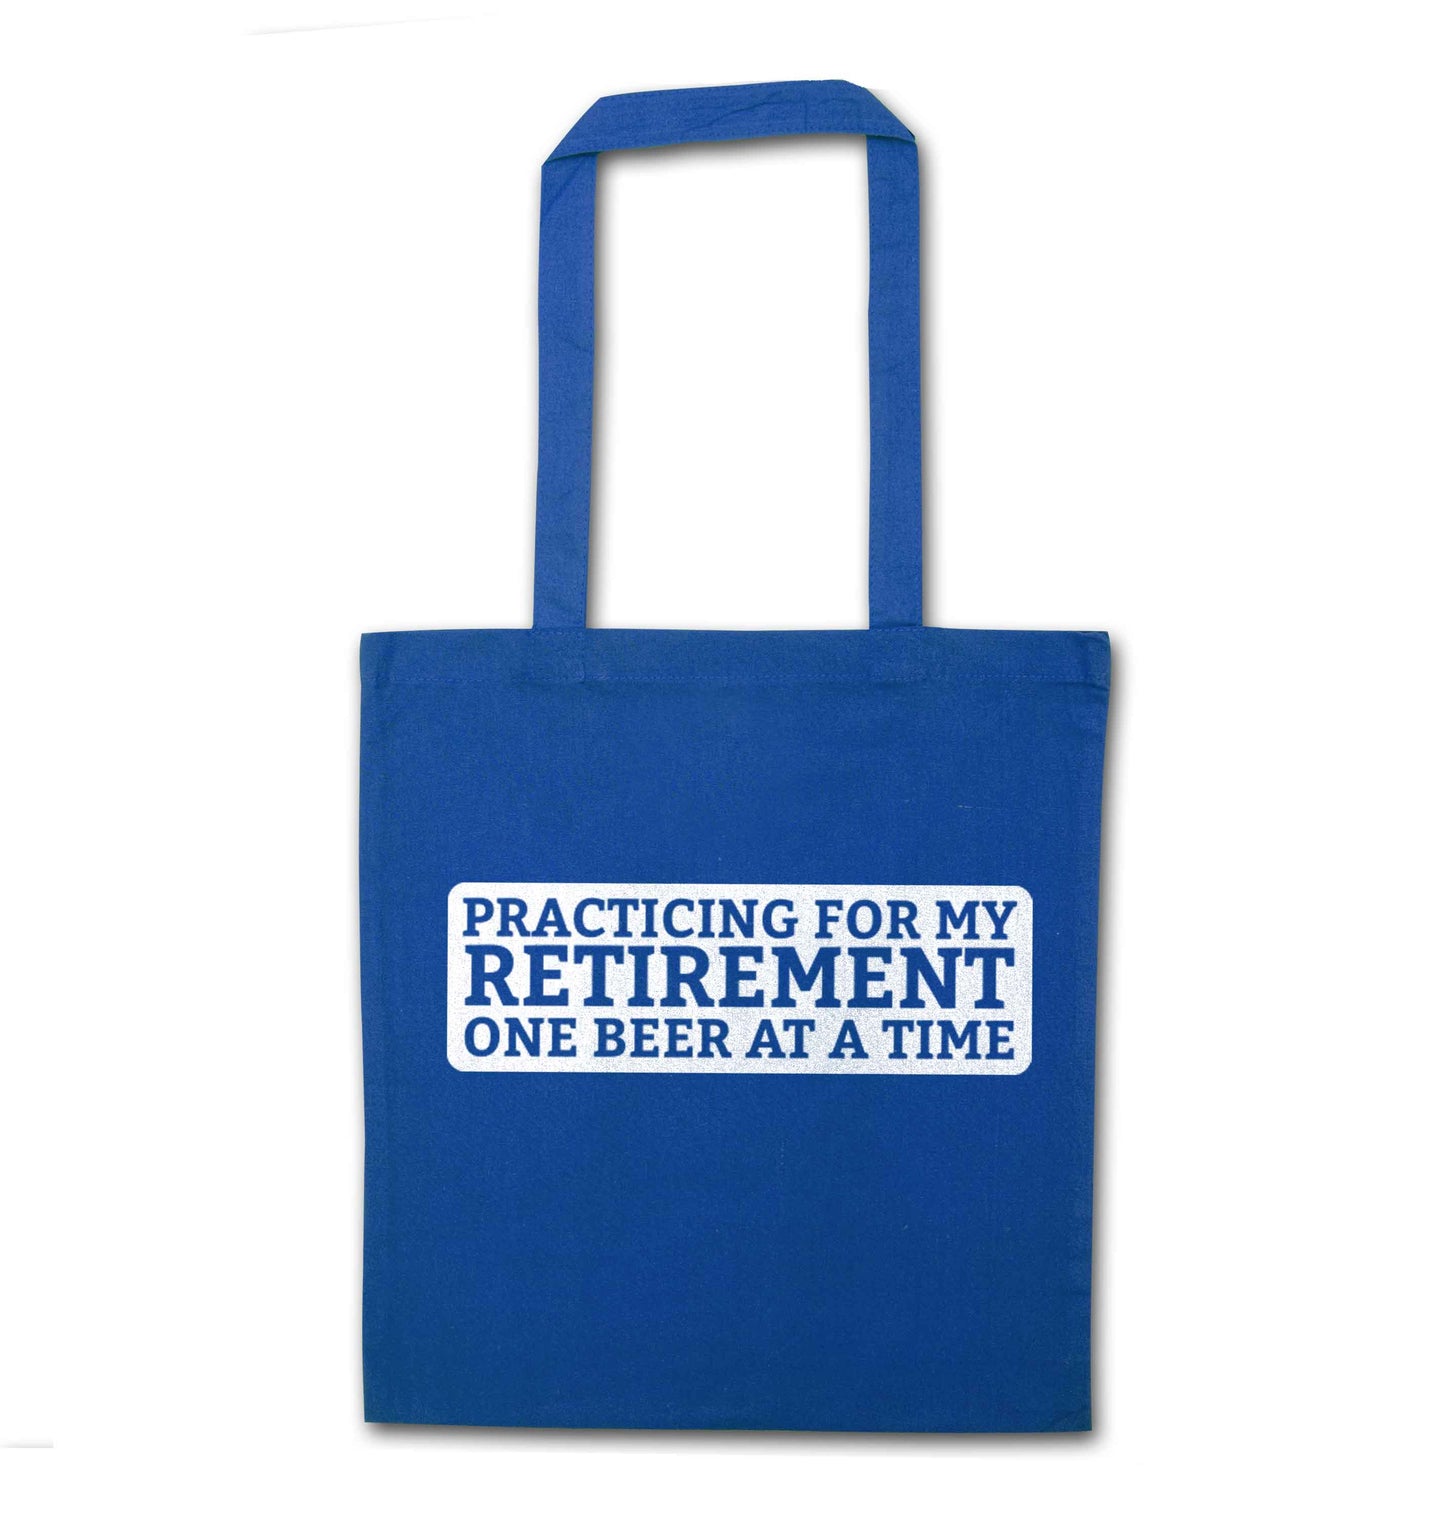 Practicing for my Retirement one Beer at a Time blue tote bag